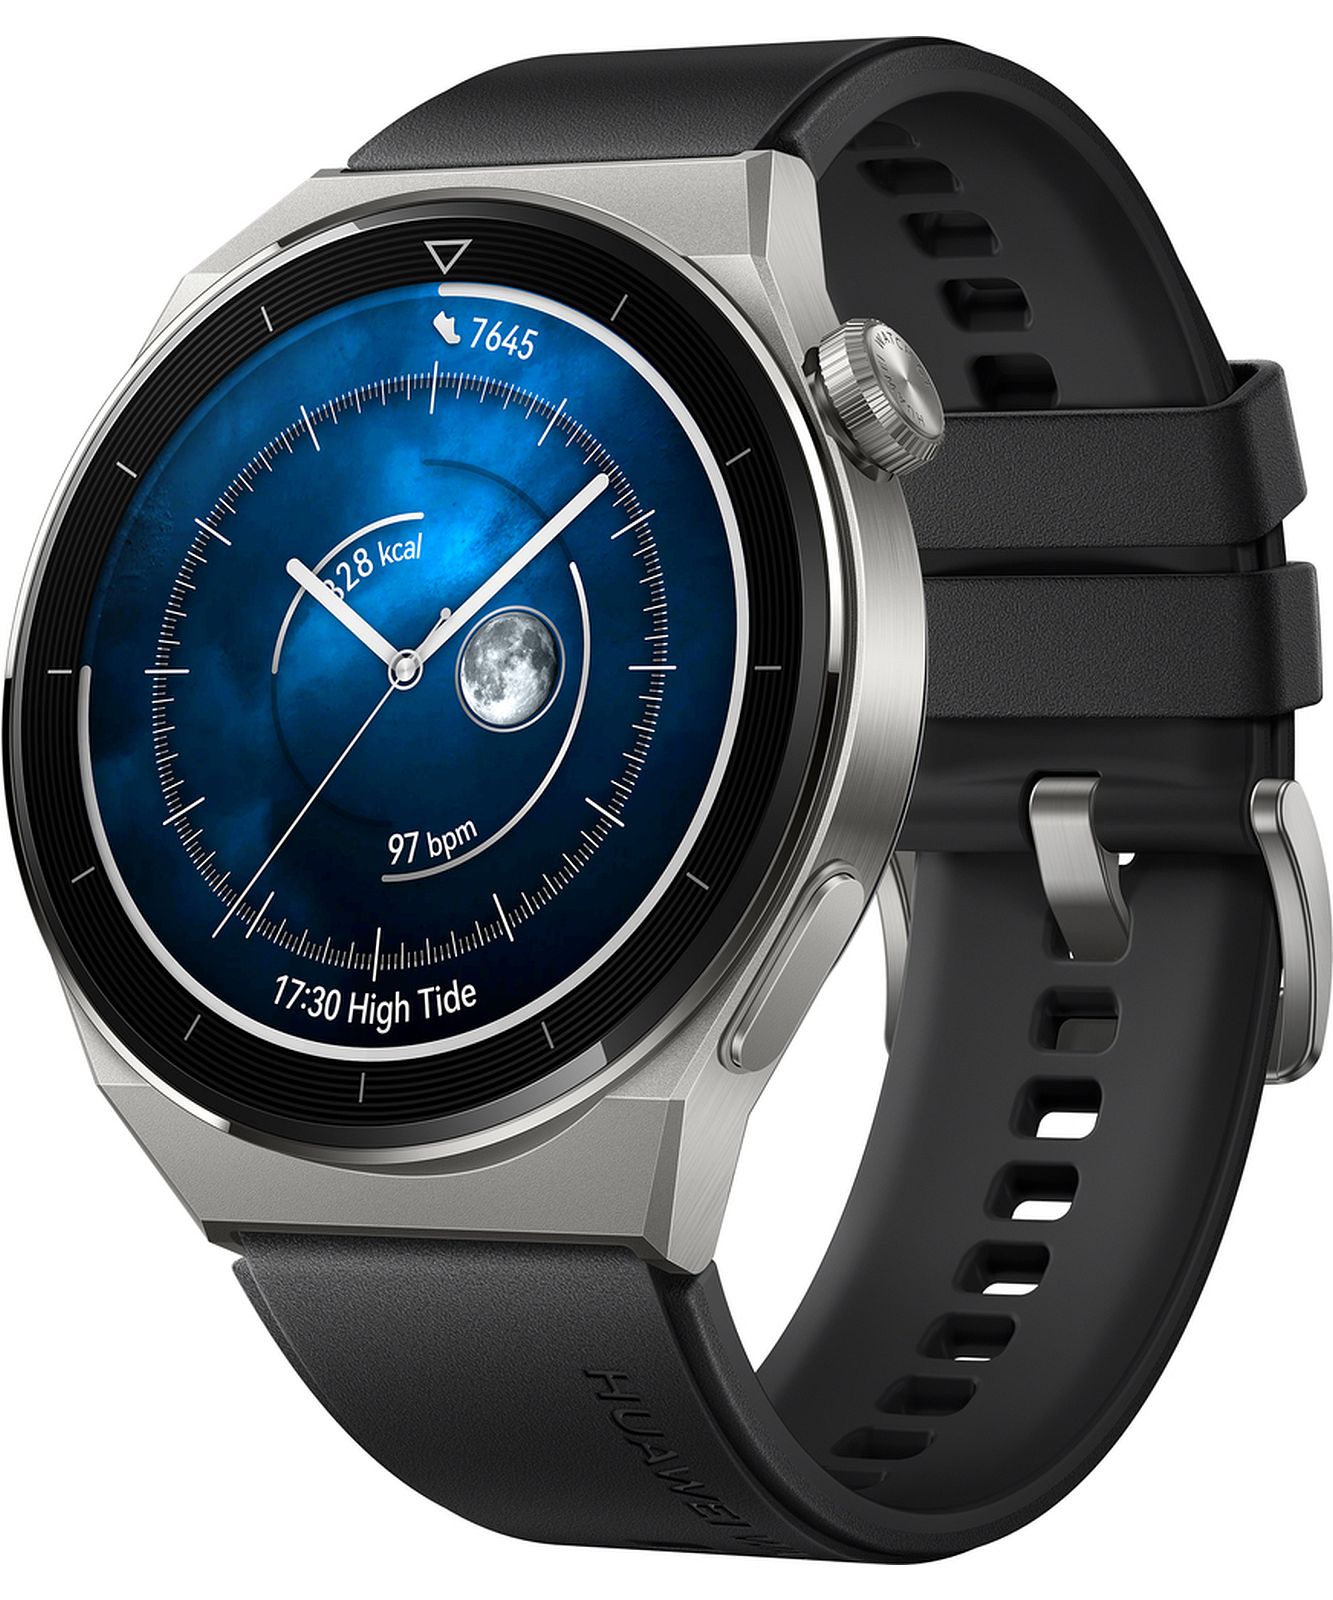 New Huawei Watch 3 Pro presented with HarmonyOS 3, ECG and improved  navigation functionality -  News